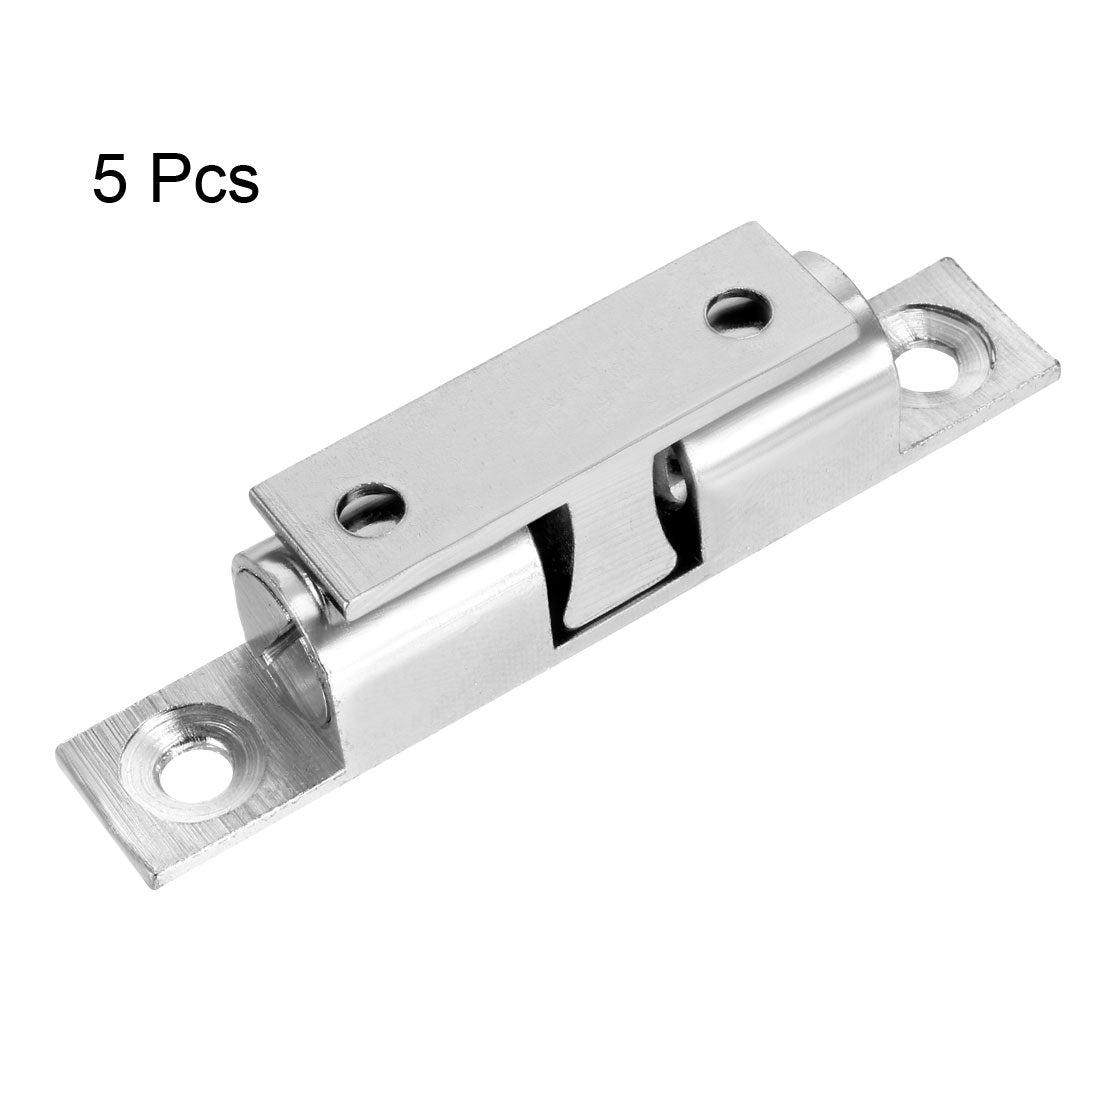 uxcell Uxcell 5pcs Cabinet Door Closet Brass Double Ball Catch Tension Latch 70mm Length Silver Tone